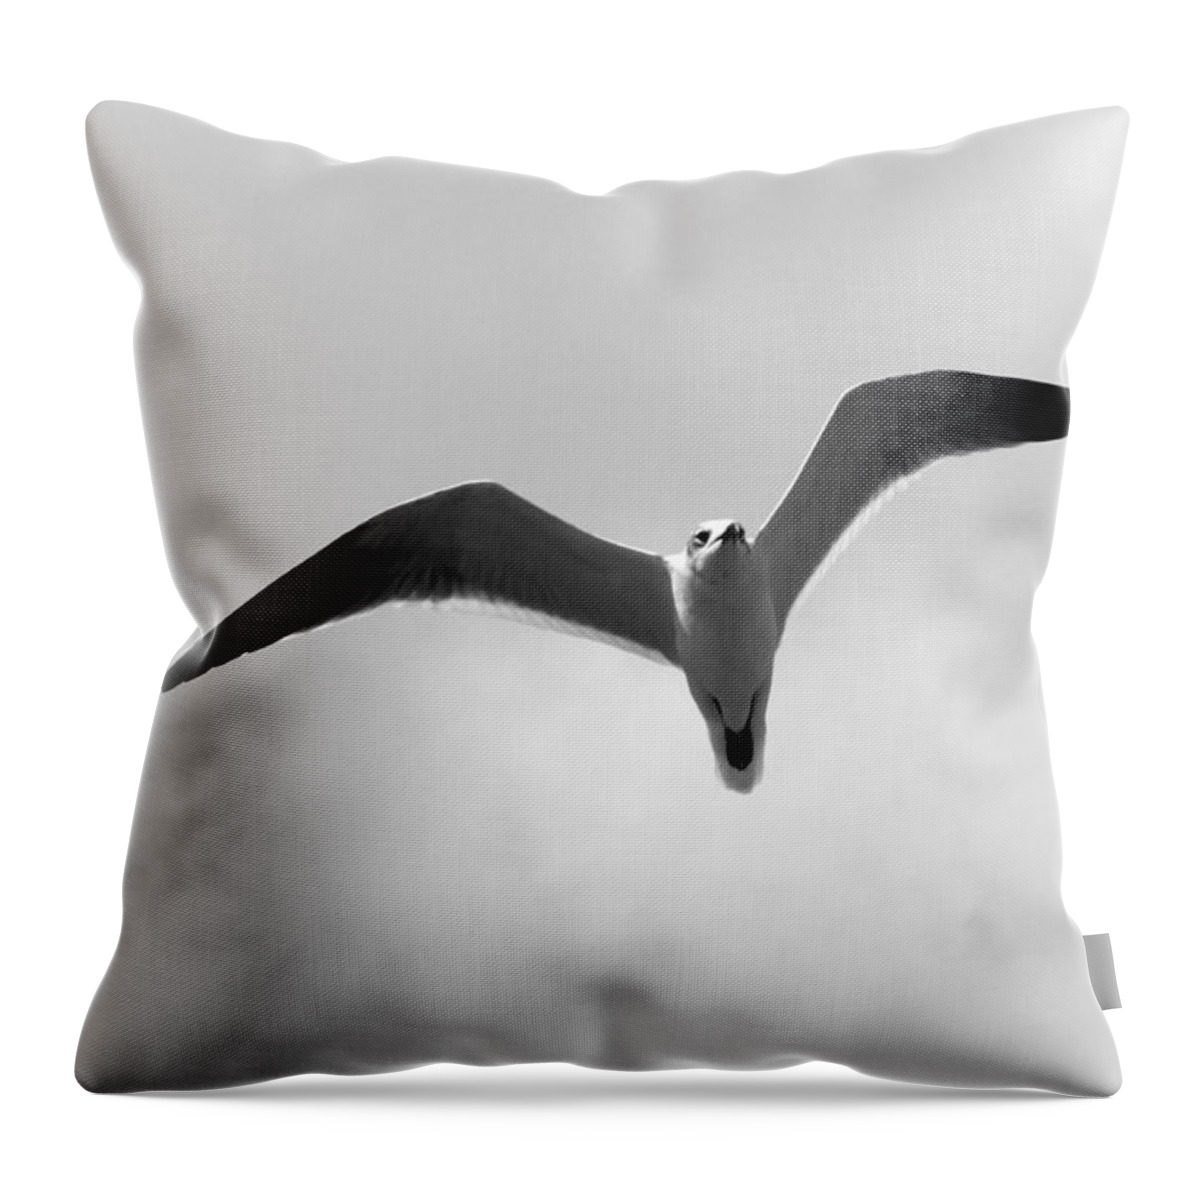 Photo For Sale Throw Pillow featuring the photograph In Flight by Robert Wilder Jr